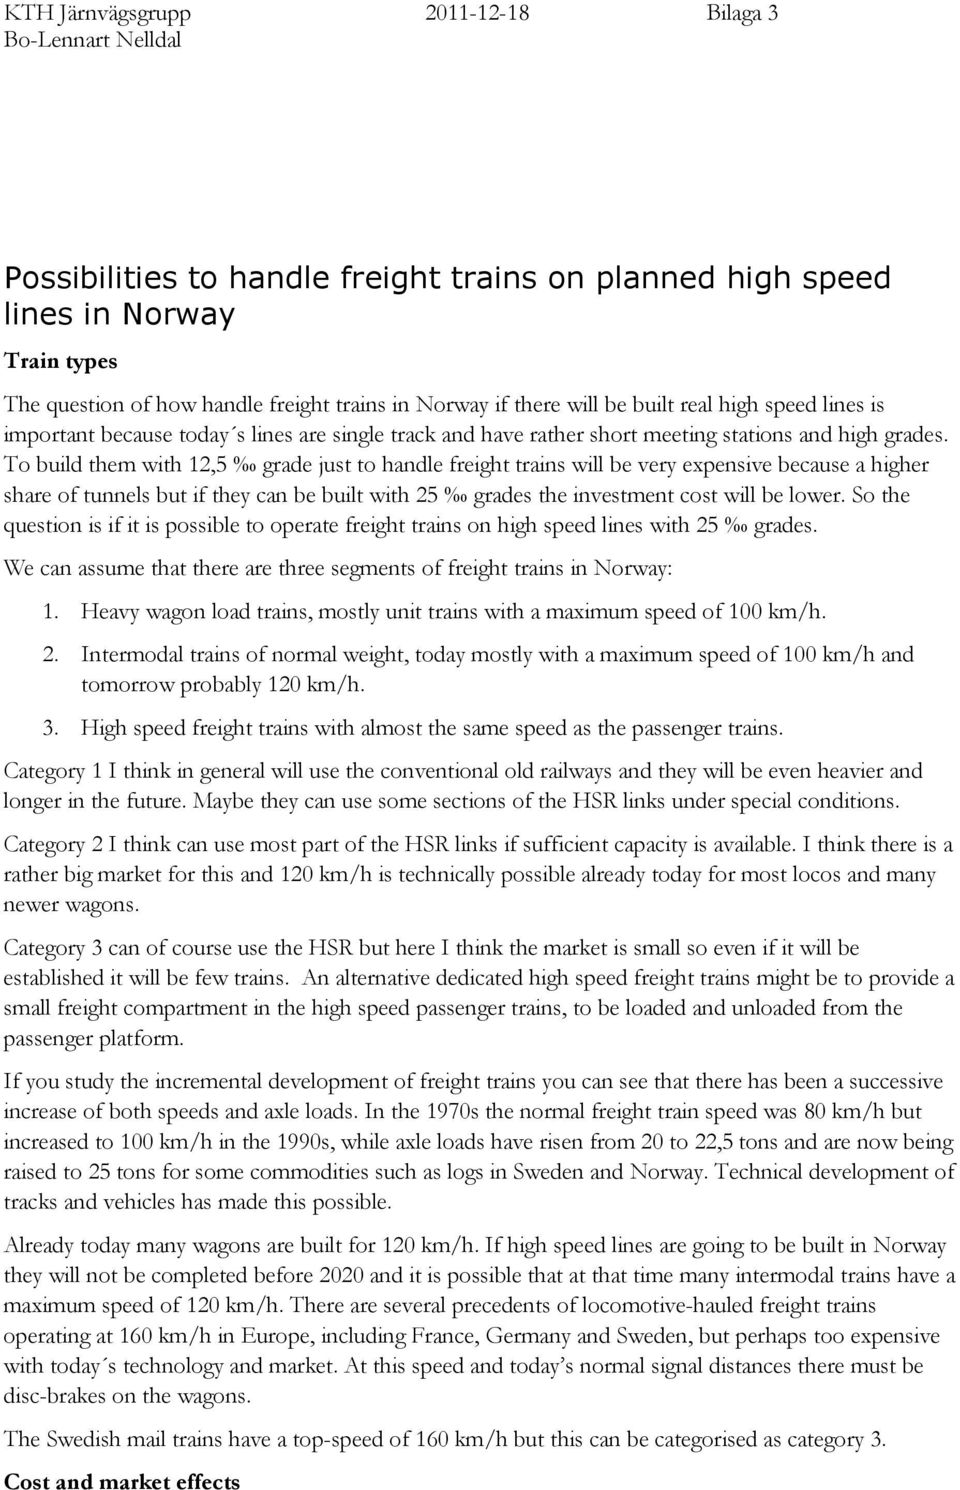 To build them with 12,5 grade just to handle freight trains will be very expensive because a higher share of tunnels but if they can be built with 25 grades the investment cost will be lower.